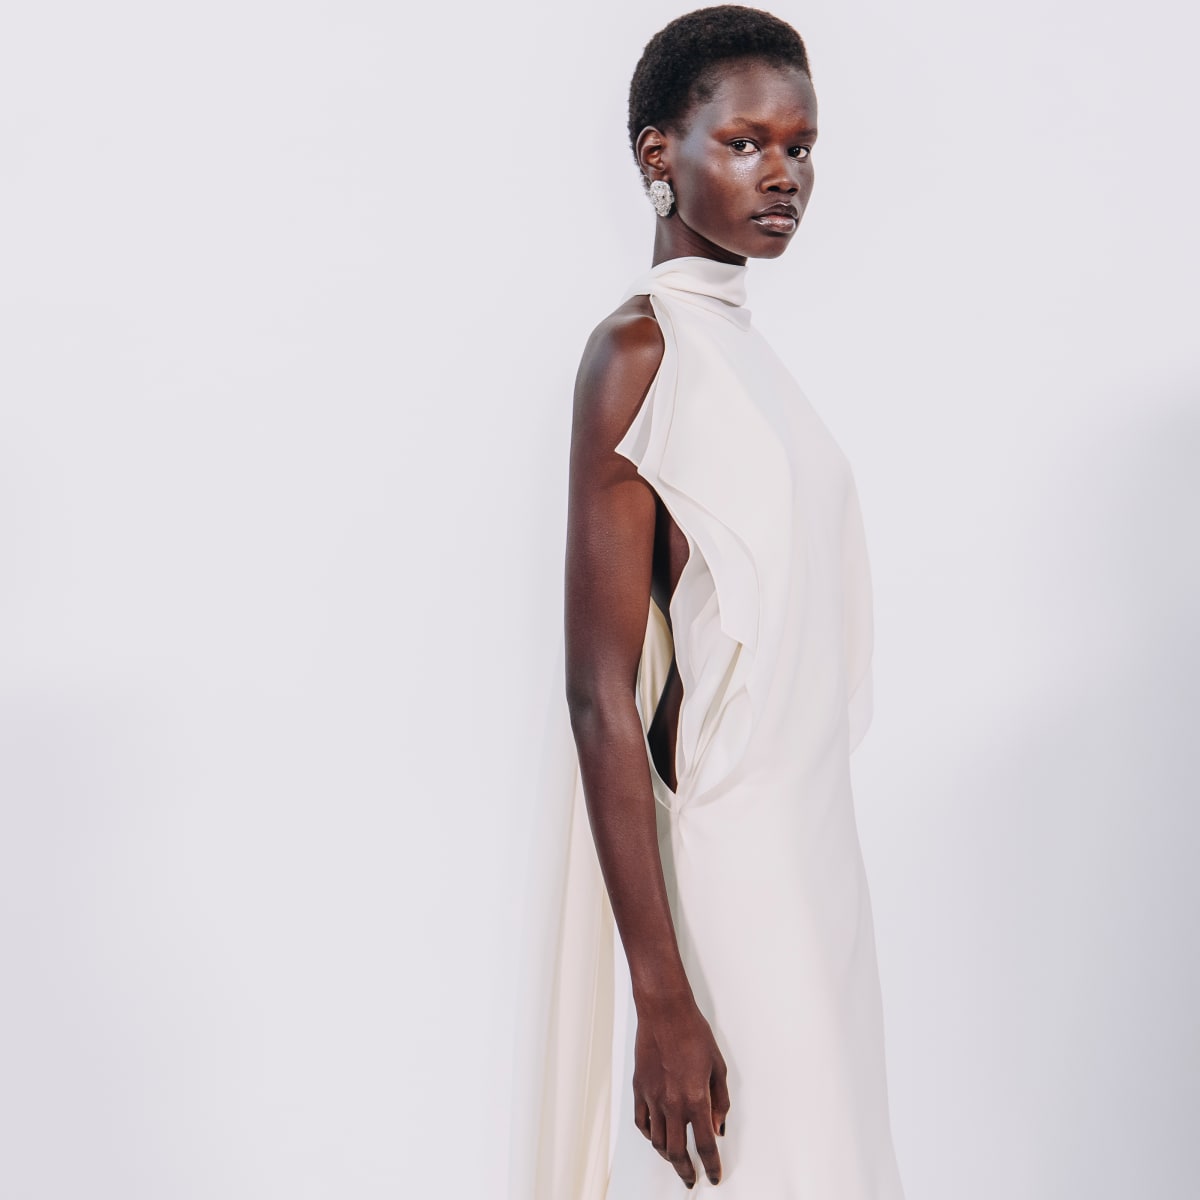 At Brandon Maxwell, the Dress is a Lifeline